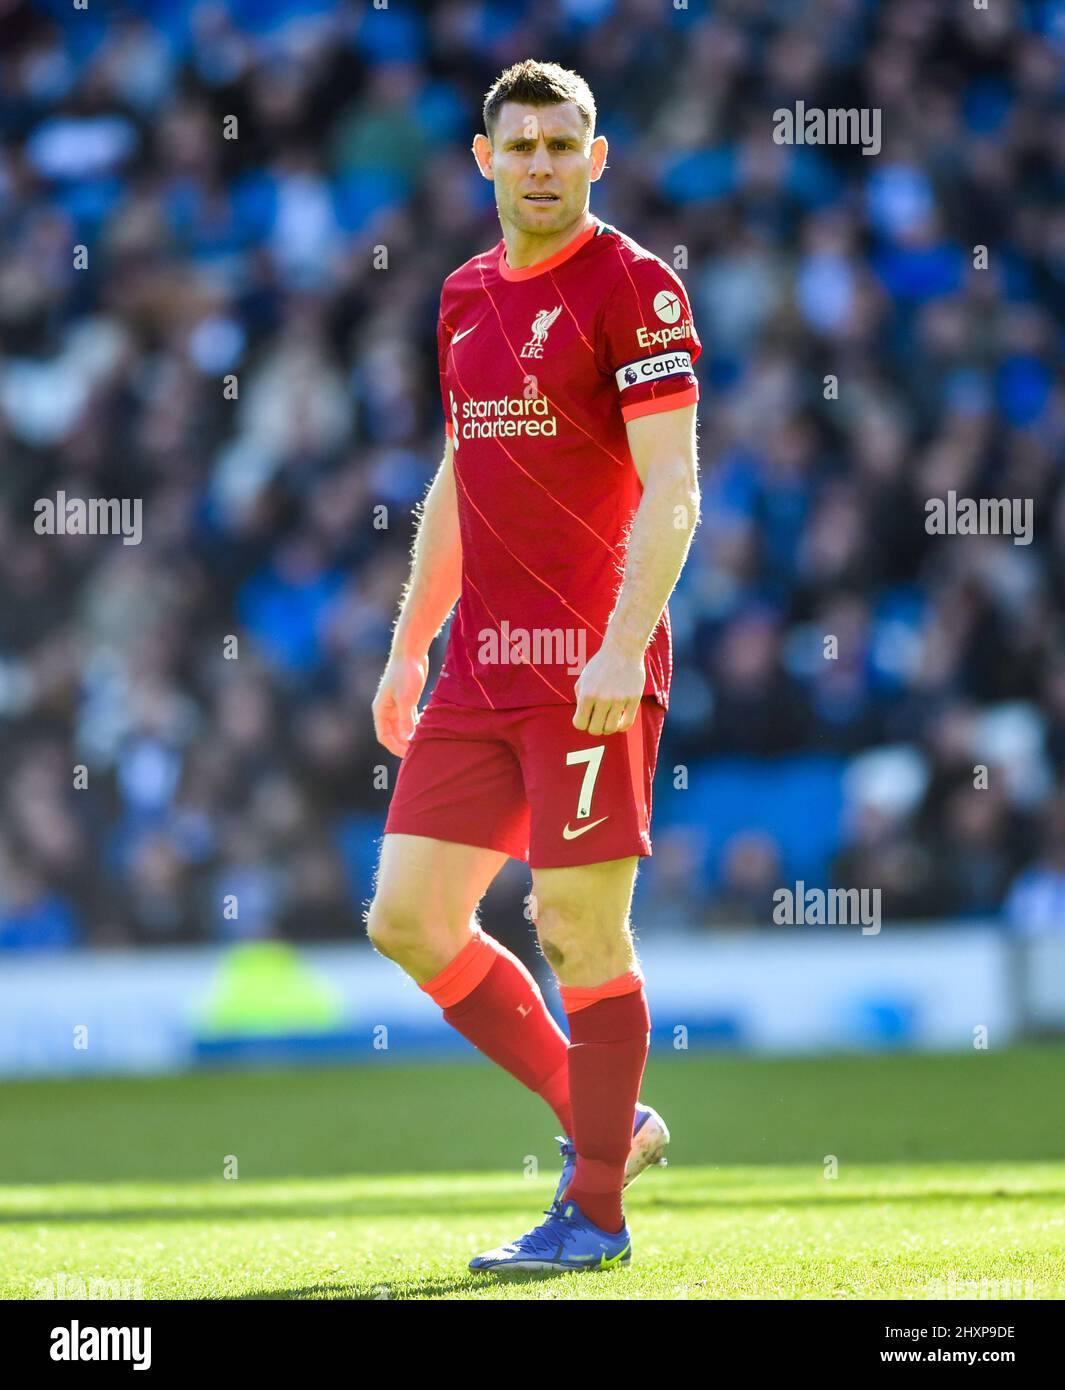 James Milner of Liverpool during the Premier League match between Brighton and Hove Albion and Liverpool at the American Express Stadium  , Brighton , UK - 12th March 2022 Photo Simon Dack/ Telephoto Images.   Editorial use only. No merchandising. For Football images FA and Premier League restrictions apply inc. no internet/mobile usage without FAPL license - for details contact Football Dataco Stock Photo